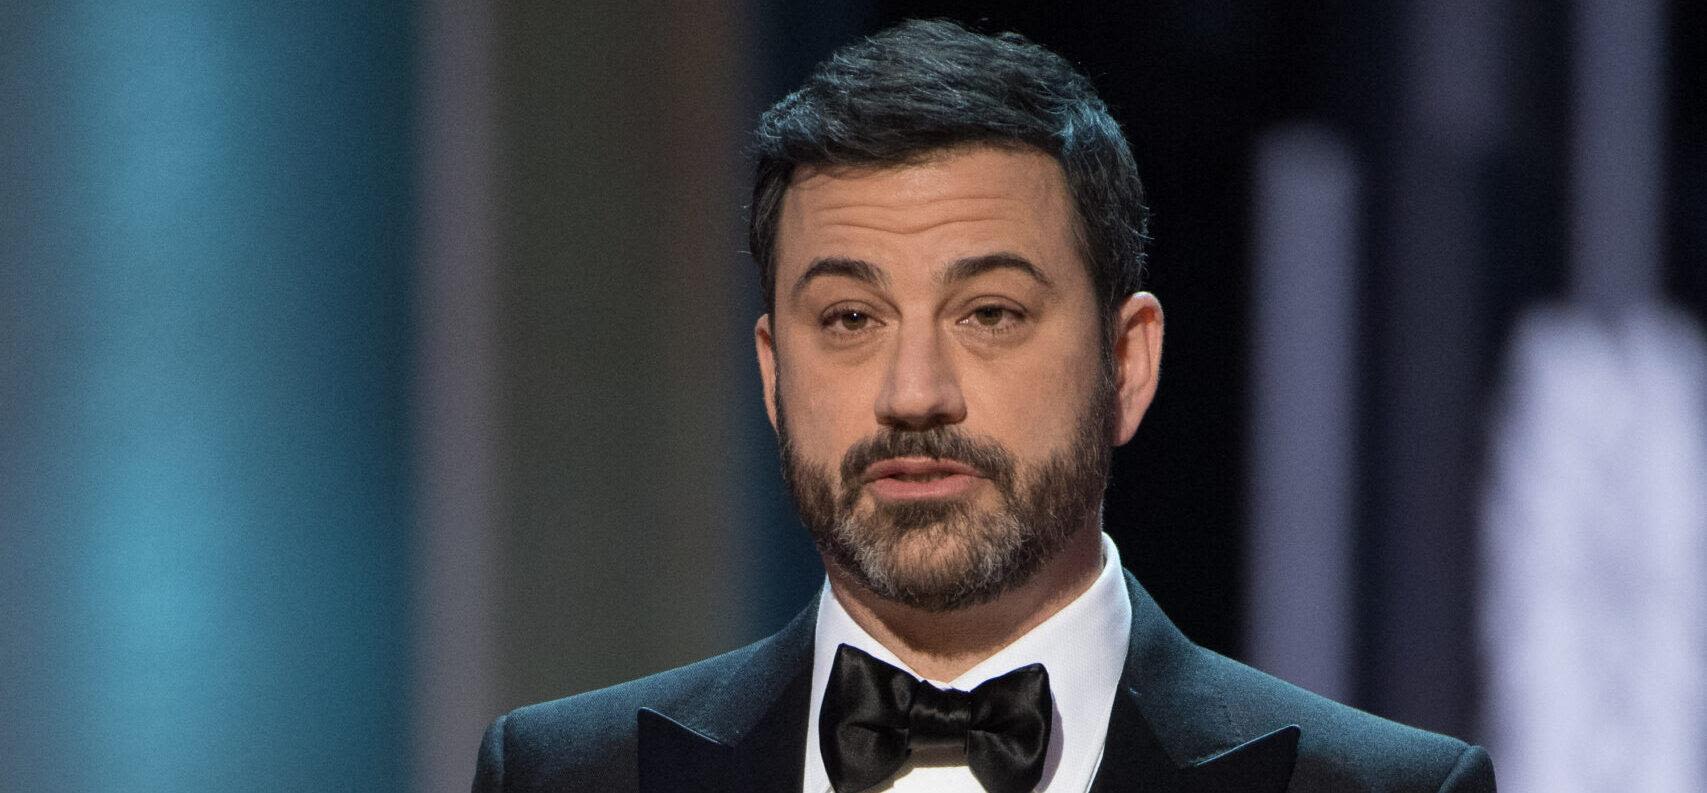 Jimmy Kimmel & Son Billy Showered With Love After 'Third Open Heart Surgery' Revelation